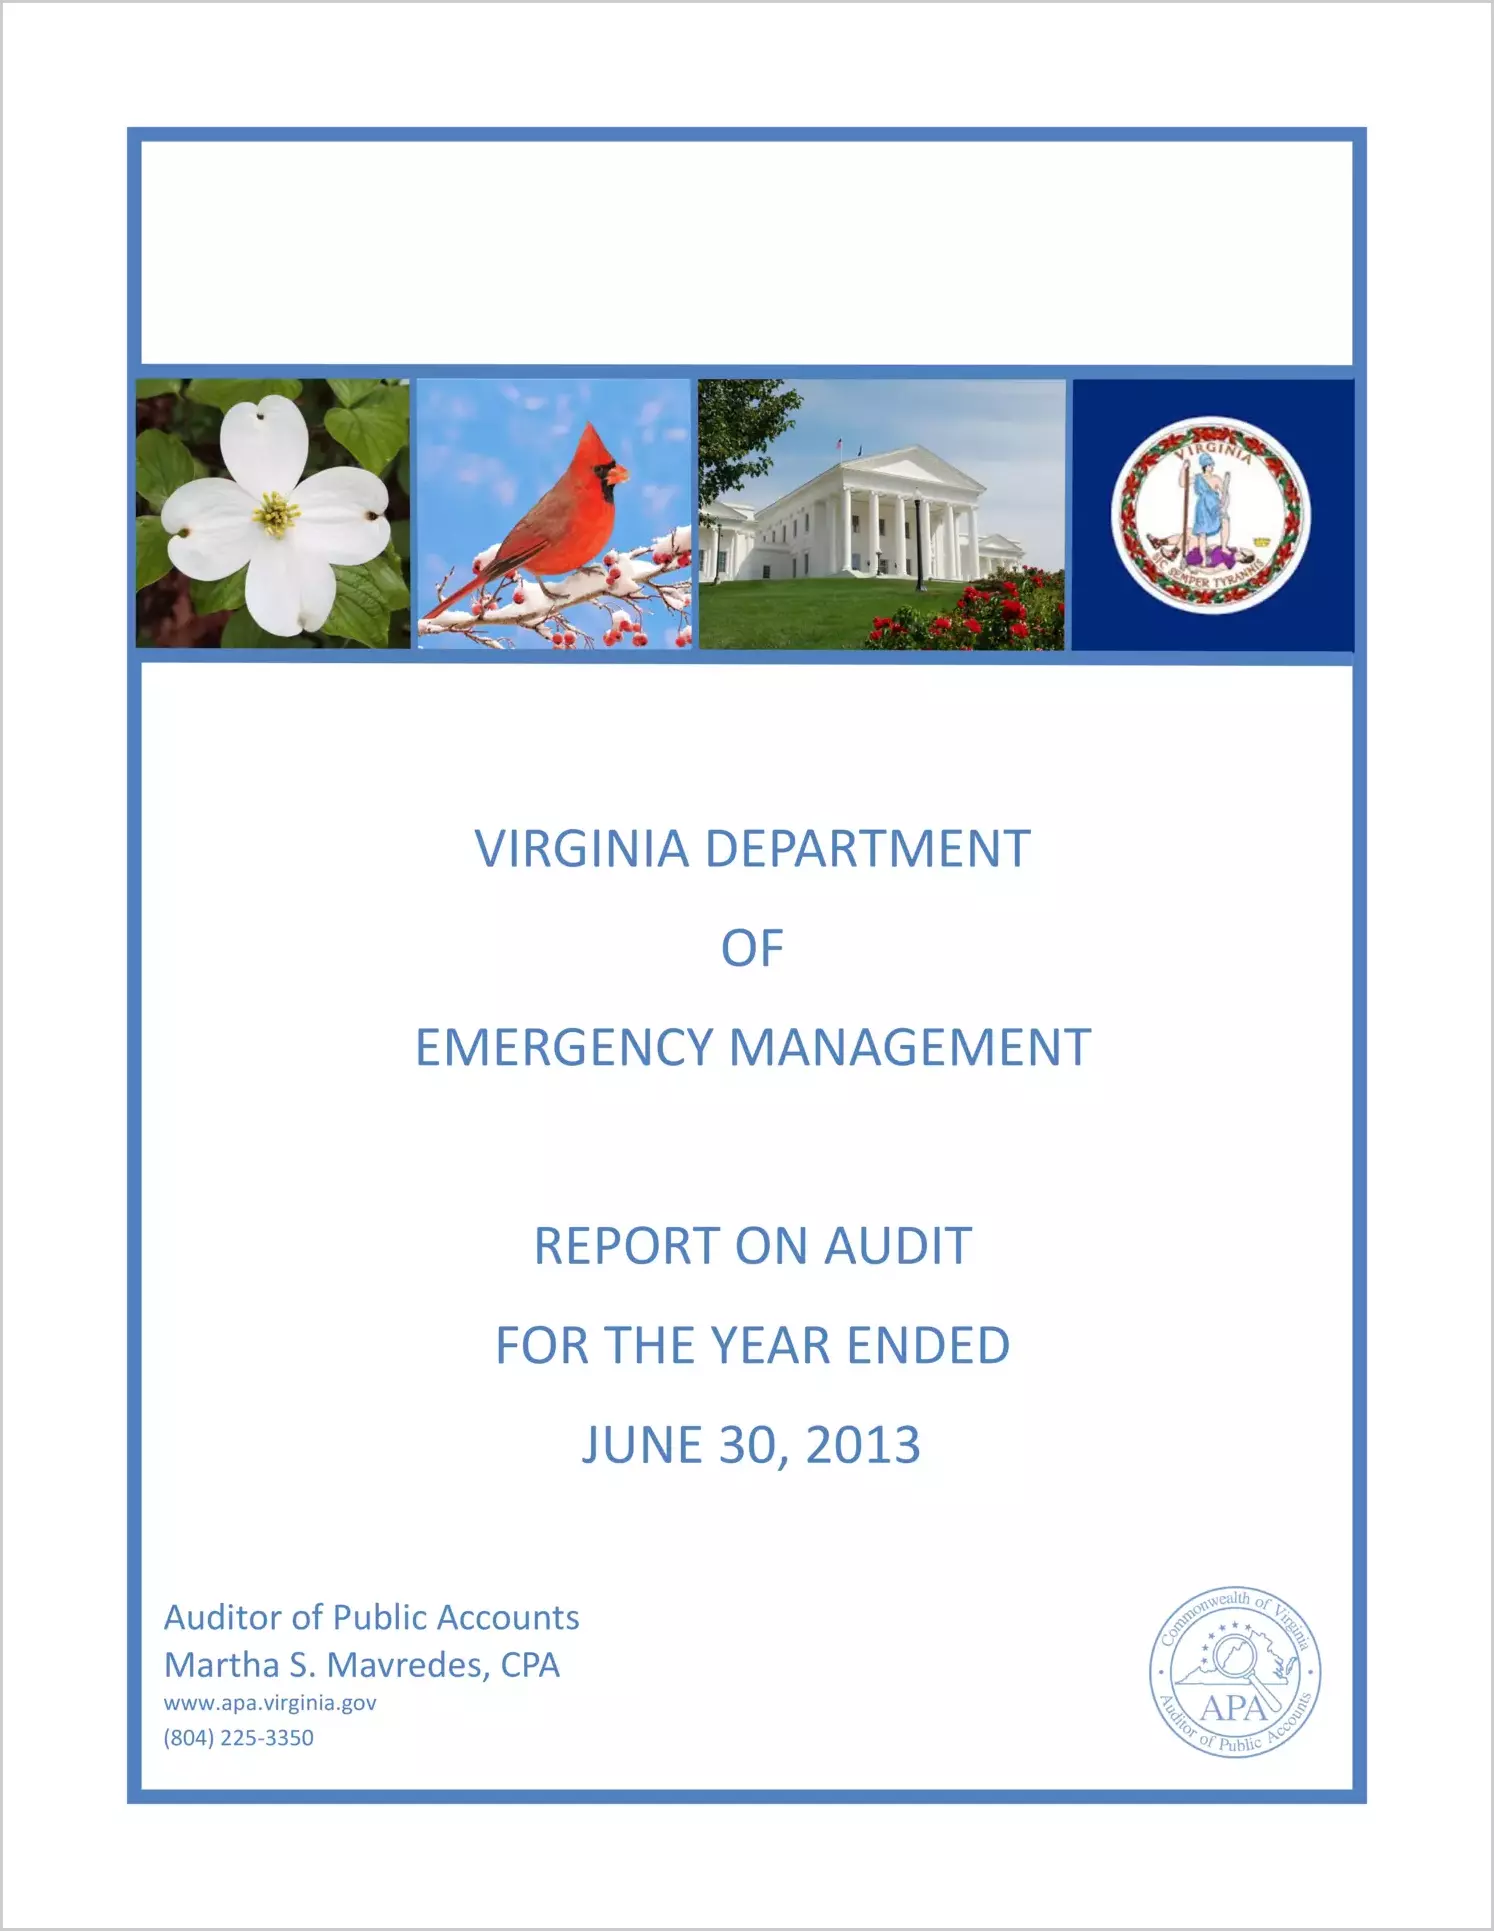 Virginia Department of Emergency Management report on audit for the year ended June 30, 2013 - FULL REPORT